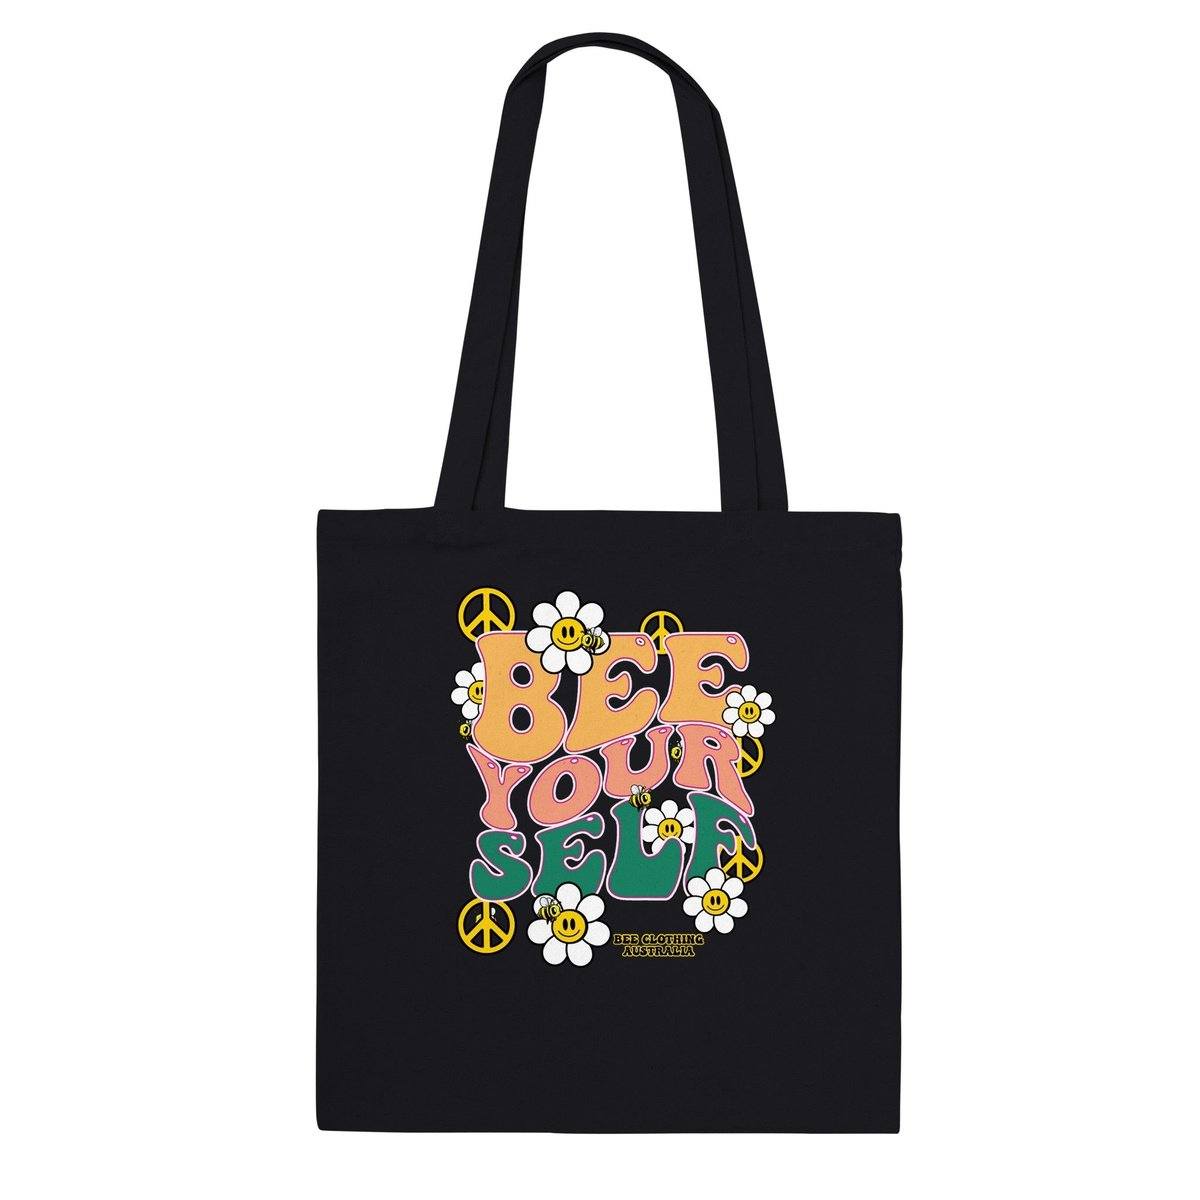 Bee Yourself groovy  - Classic Tote Bag Tote Bag Black Bee Clothing Australia